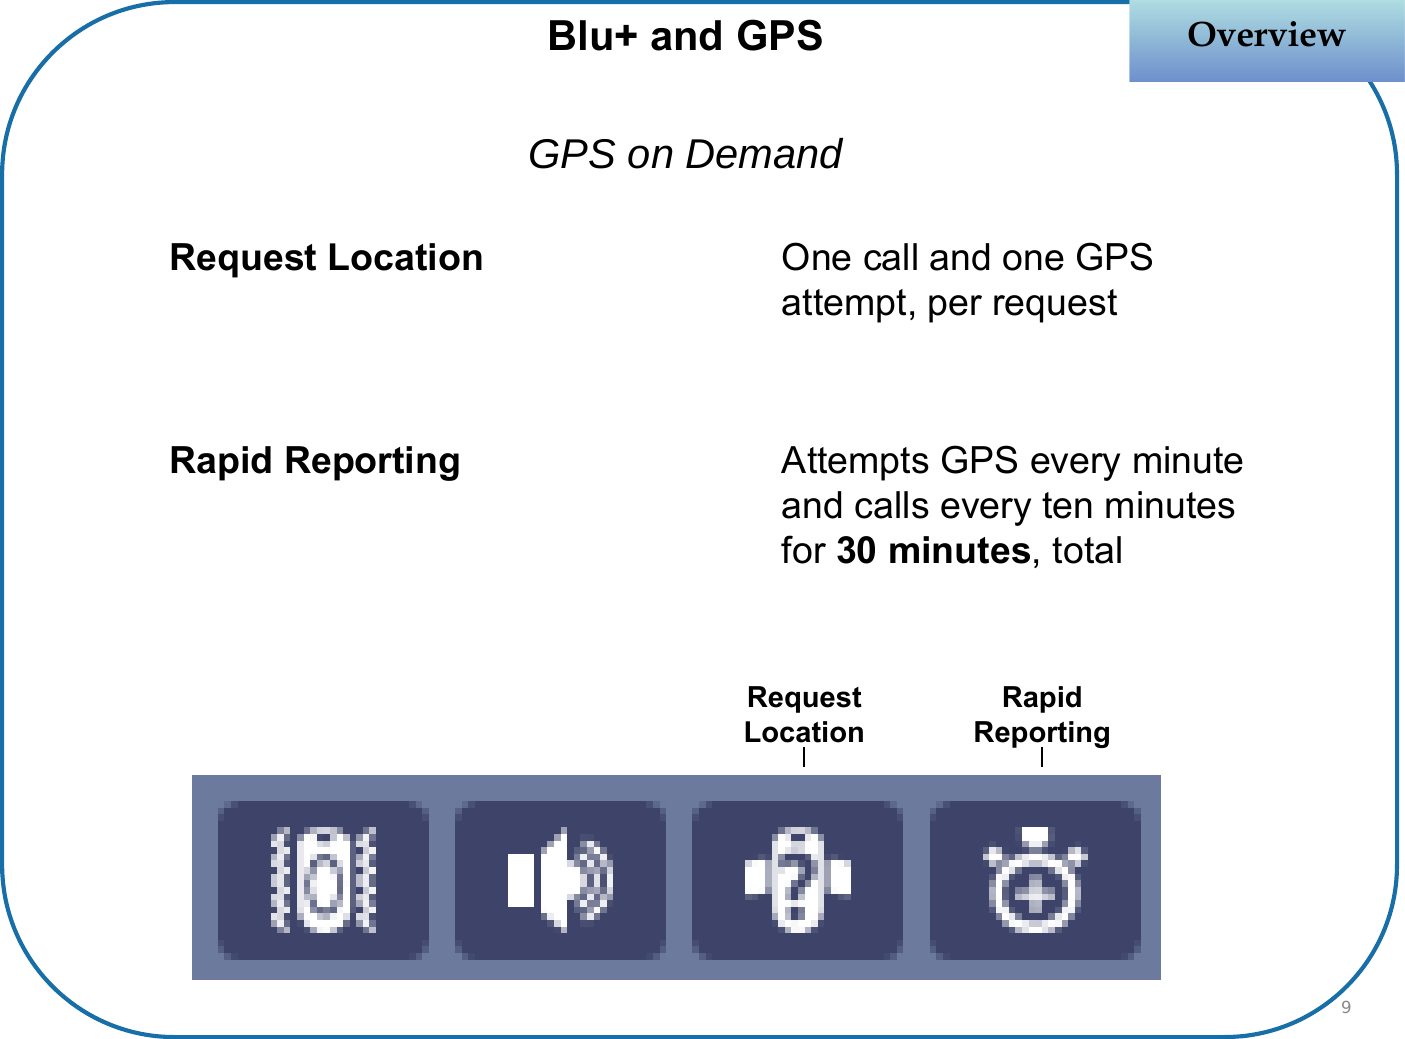 OverviewOverviewBlu+ and GPSGPS on Demand9Request Location One call and one GPS attempt, per requestRapid Reporting Attempts GPS every minute and calls every ten minutes for 30 minutes, totalRequestLocationRapidReporting